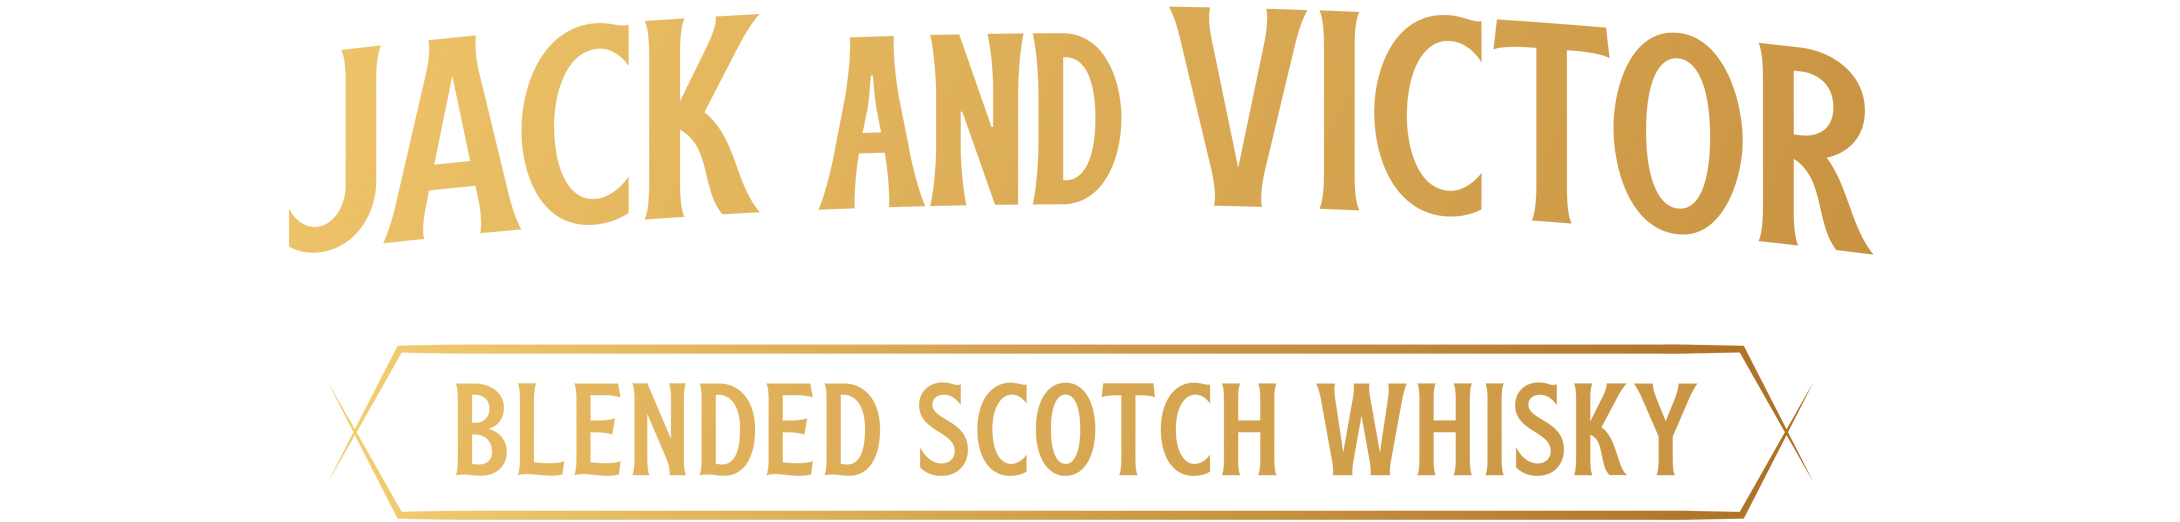 Jack and Victor Blended Scotch Whisky Logotype